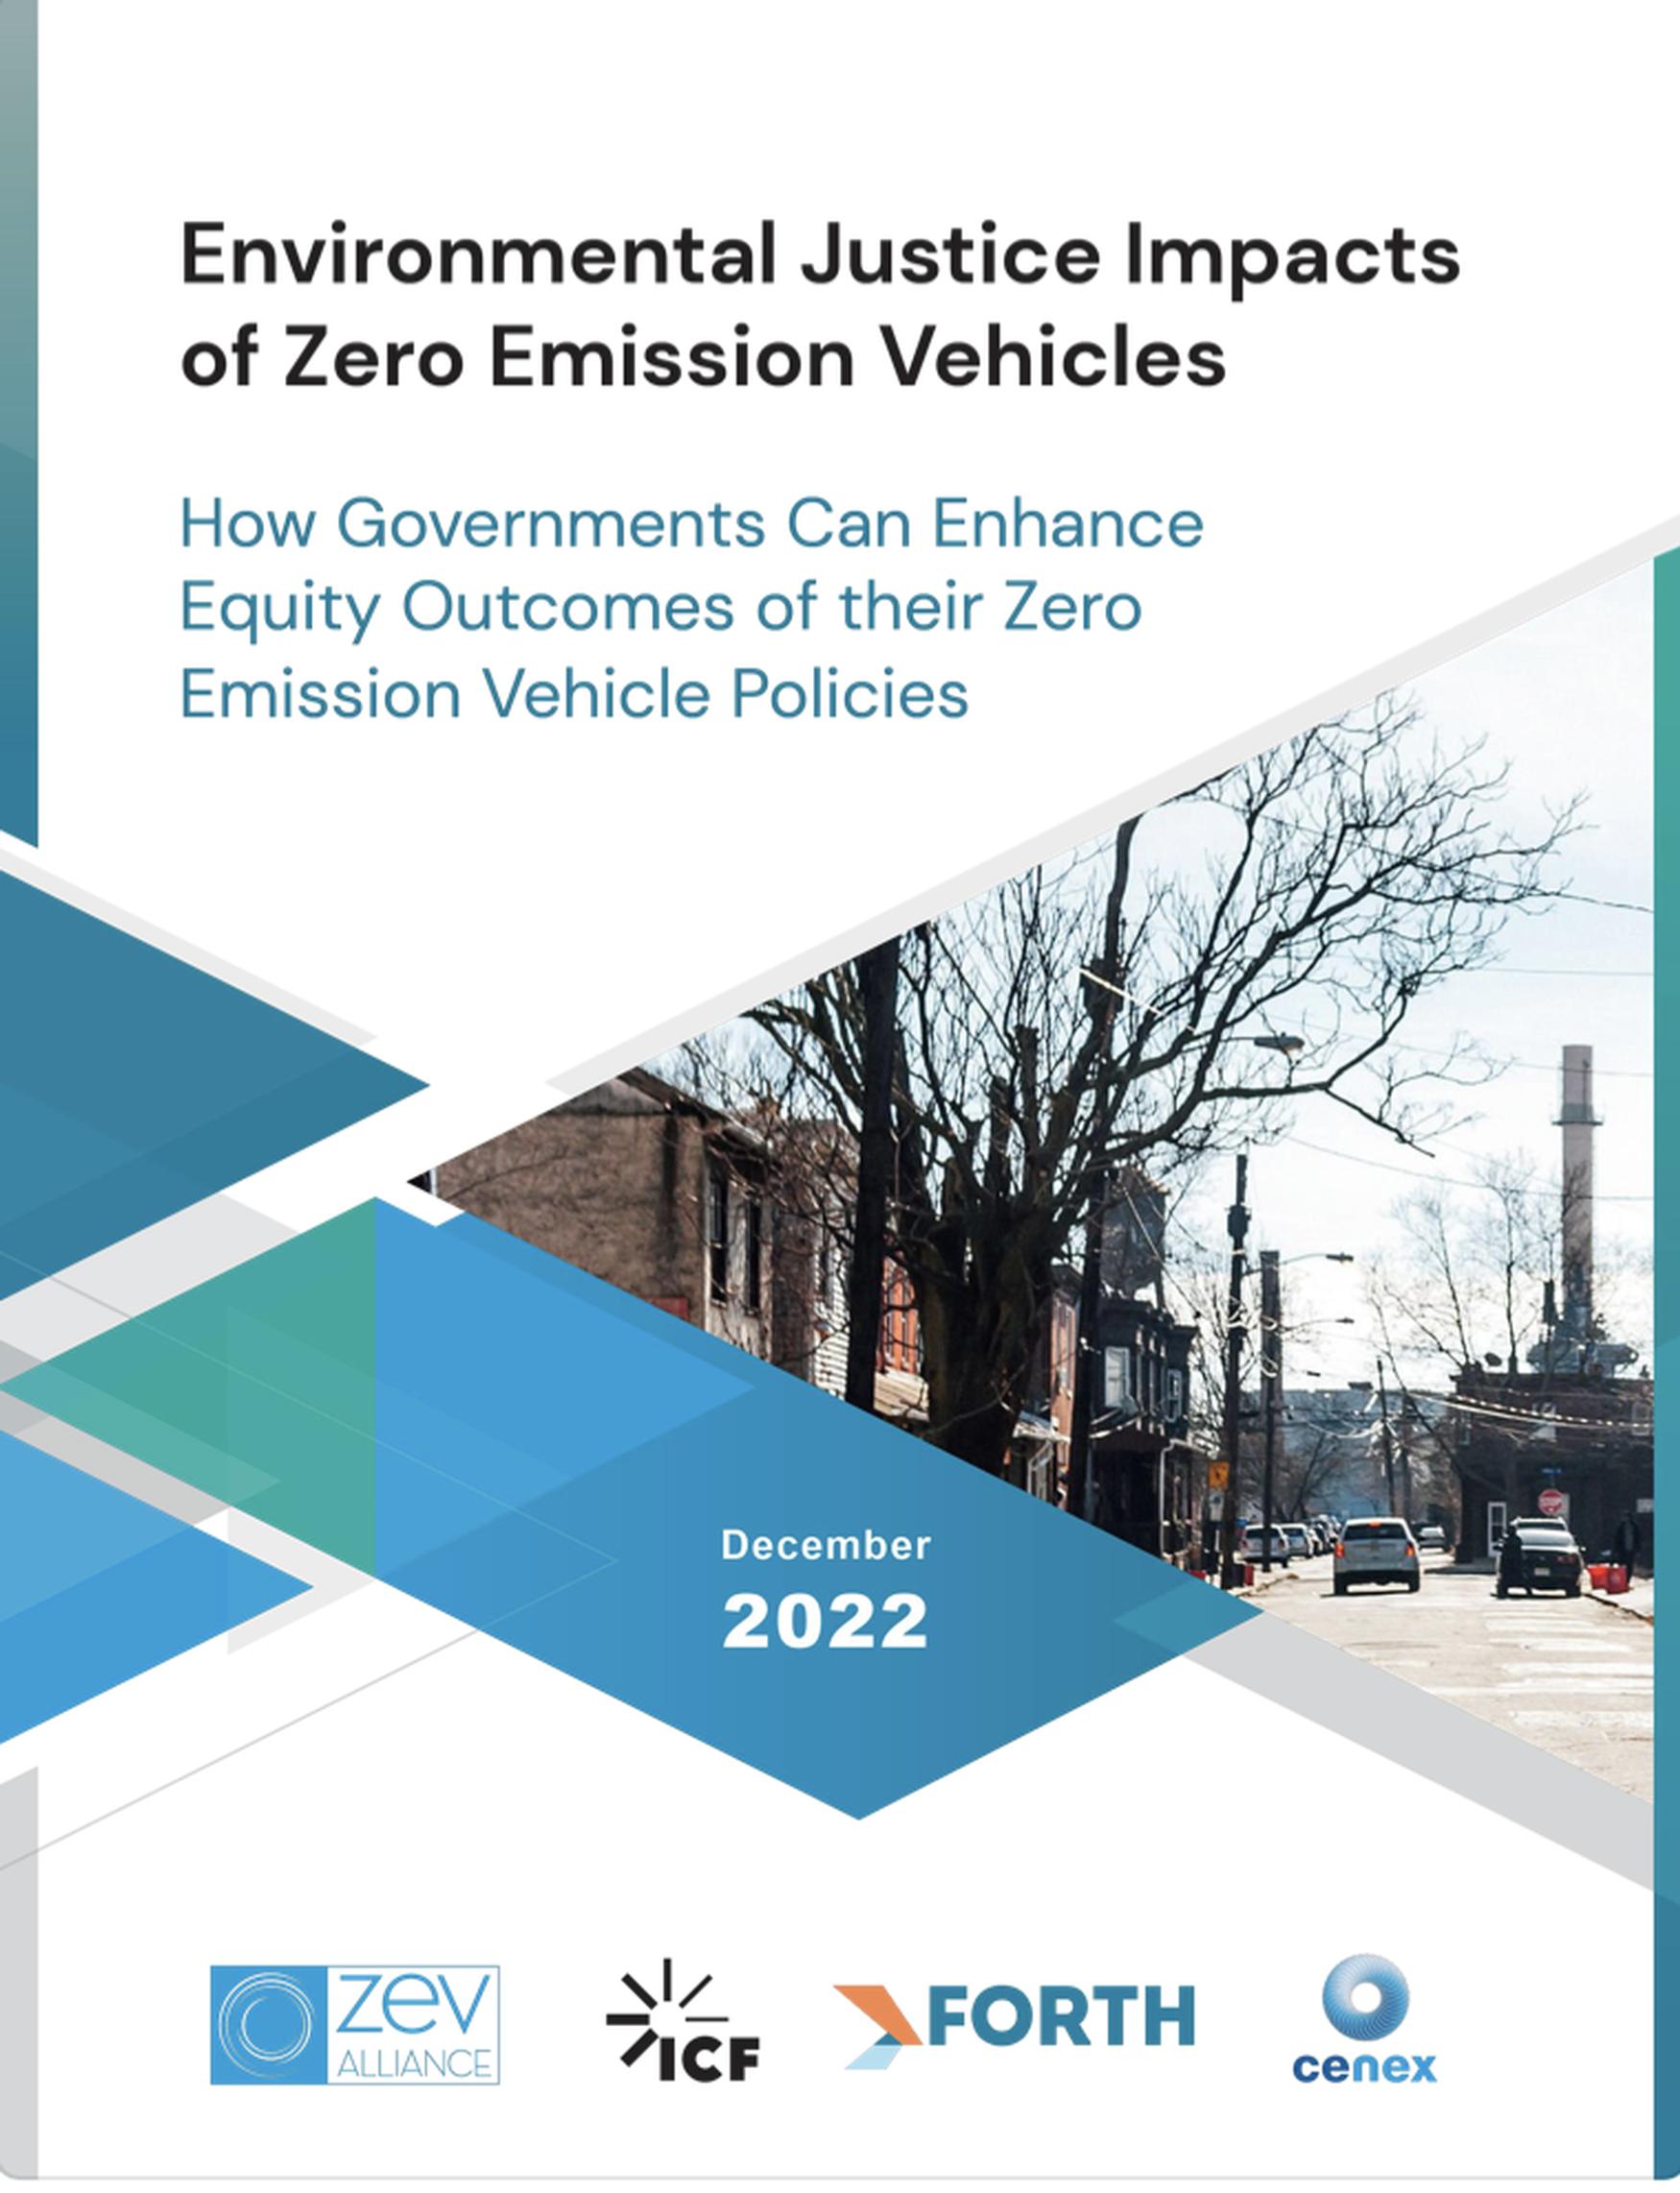 Environmental Justice Impacts of Zero Emission Vehicles